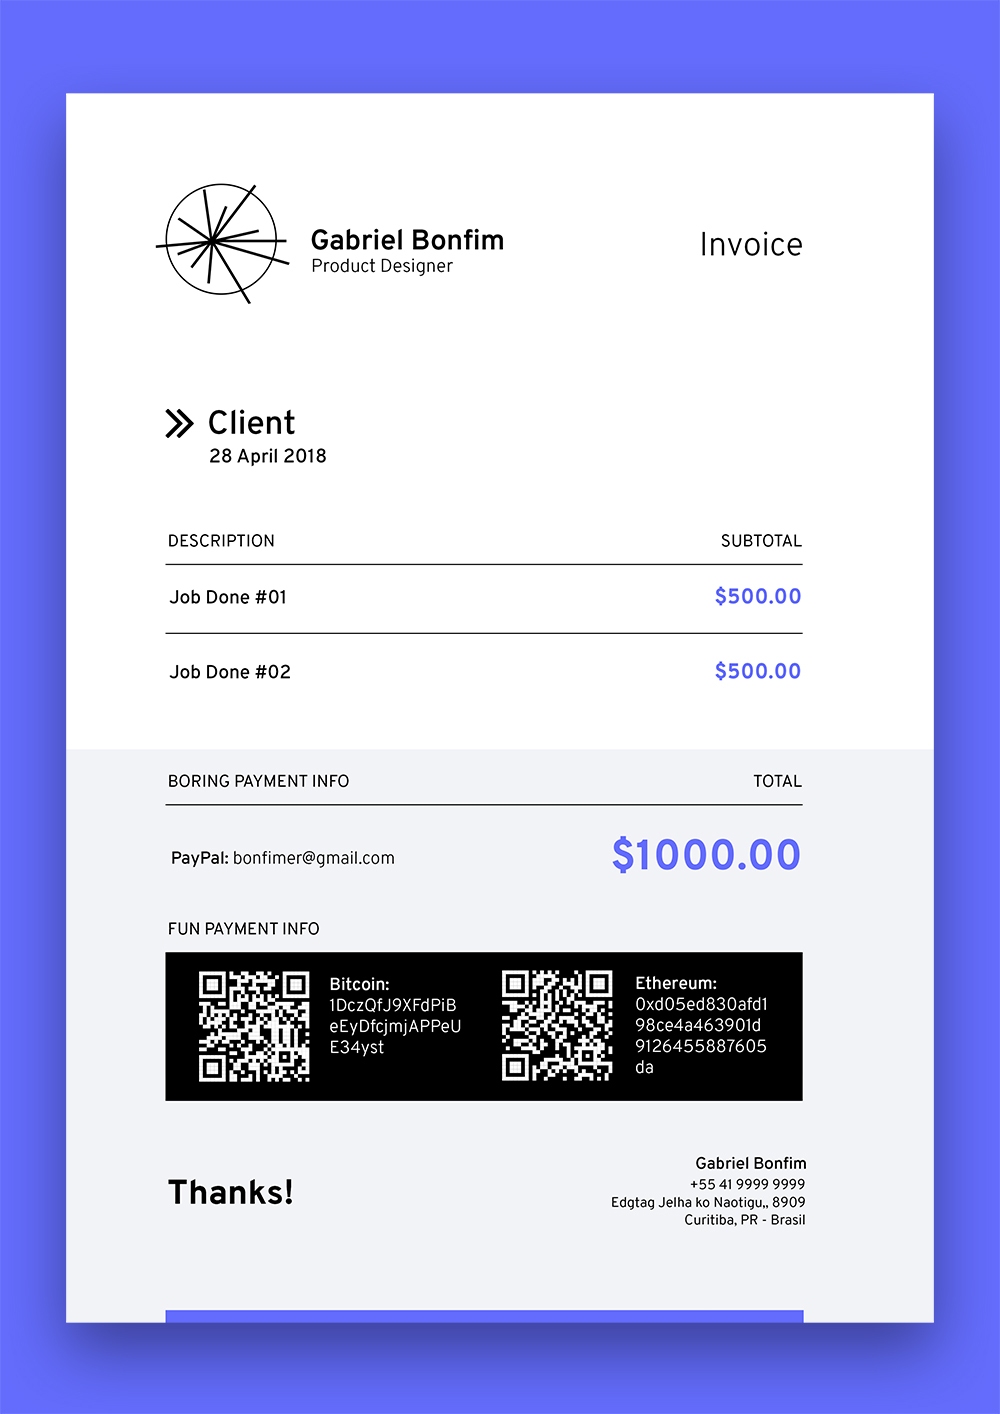 Invoice - with Crypto by Gabriel Bonfim on Dribbble